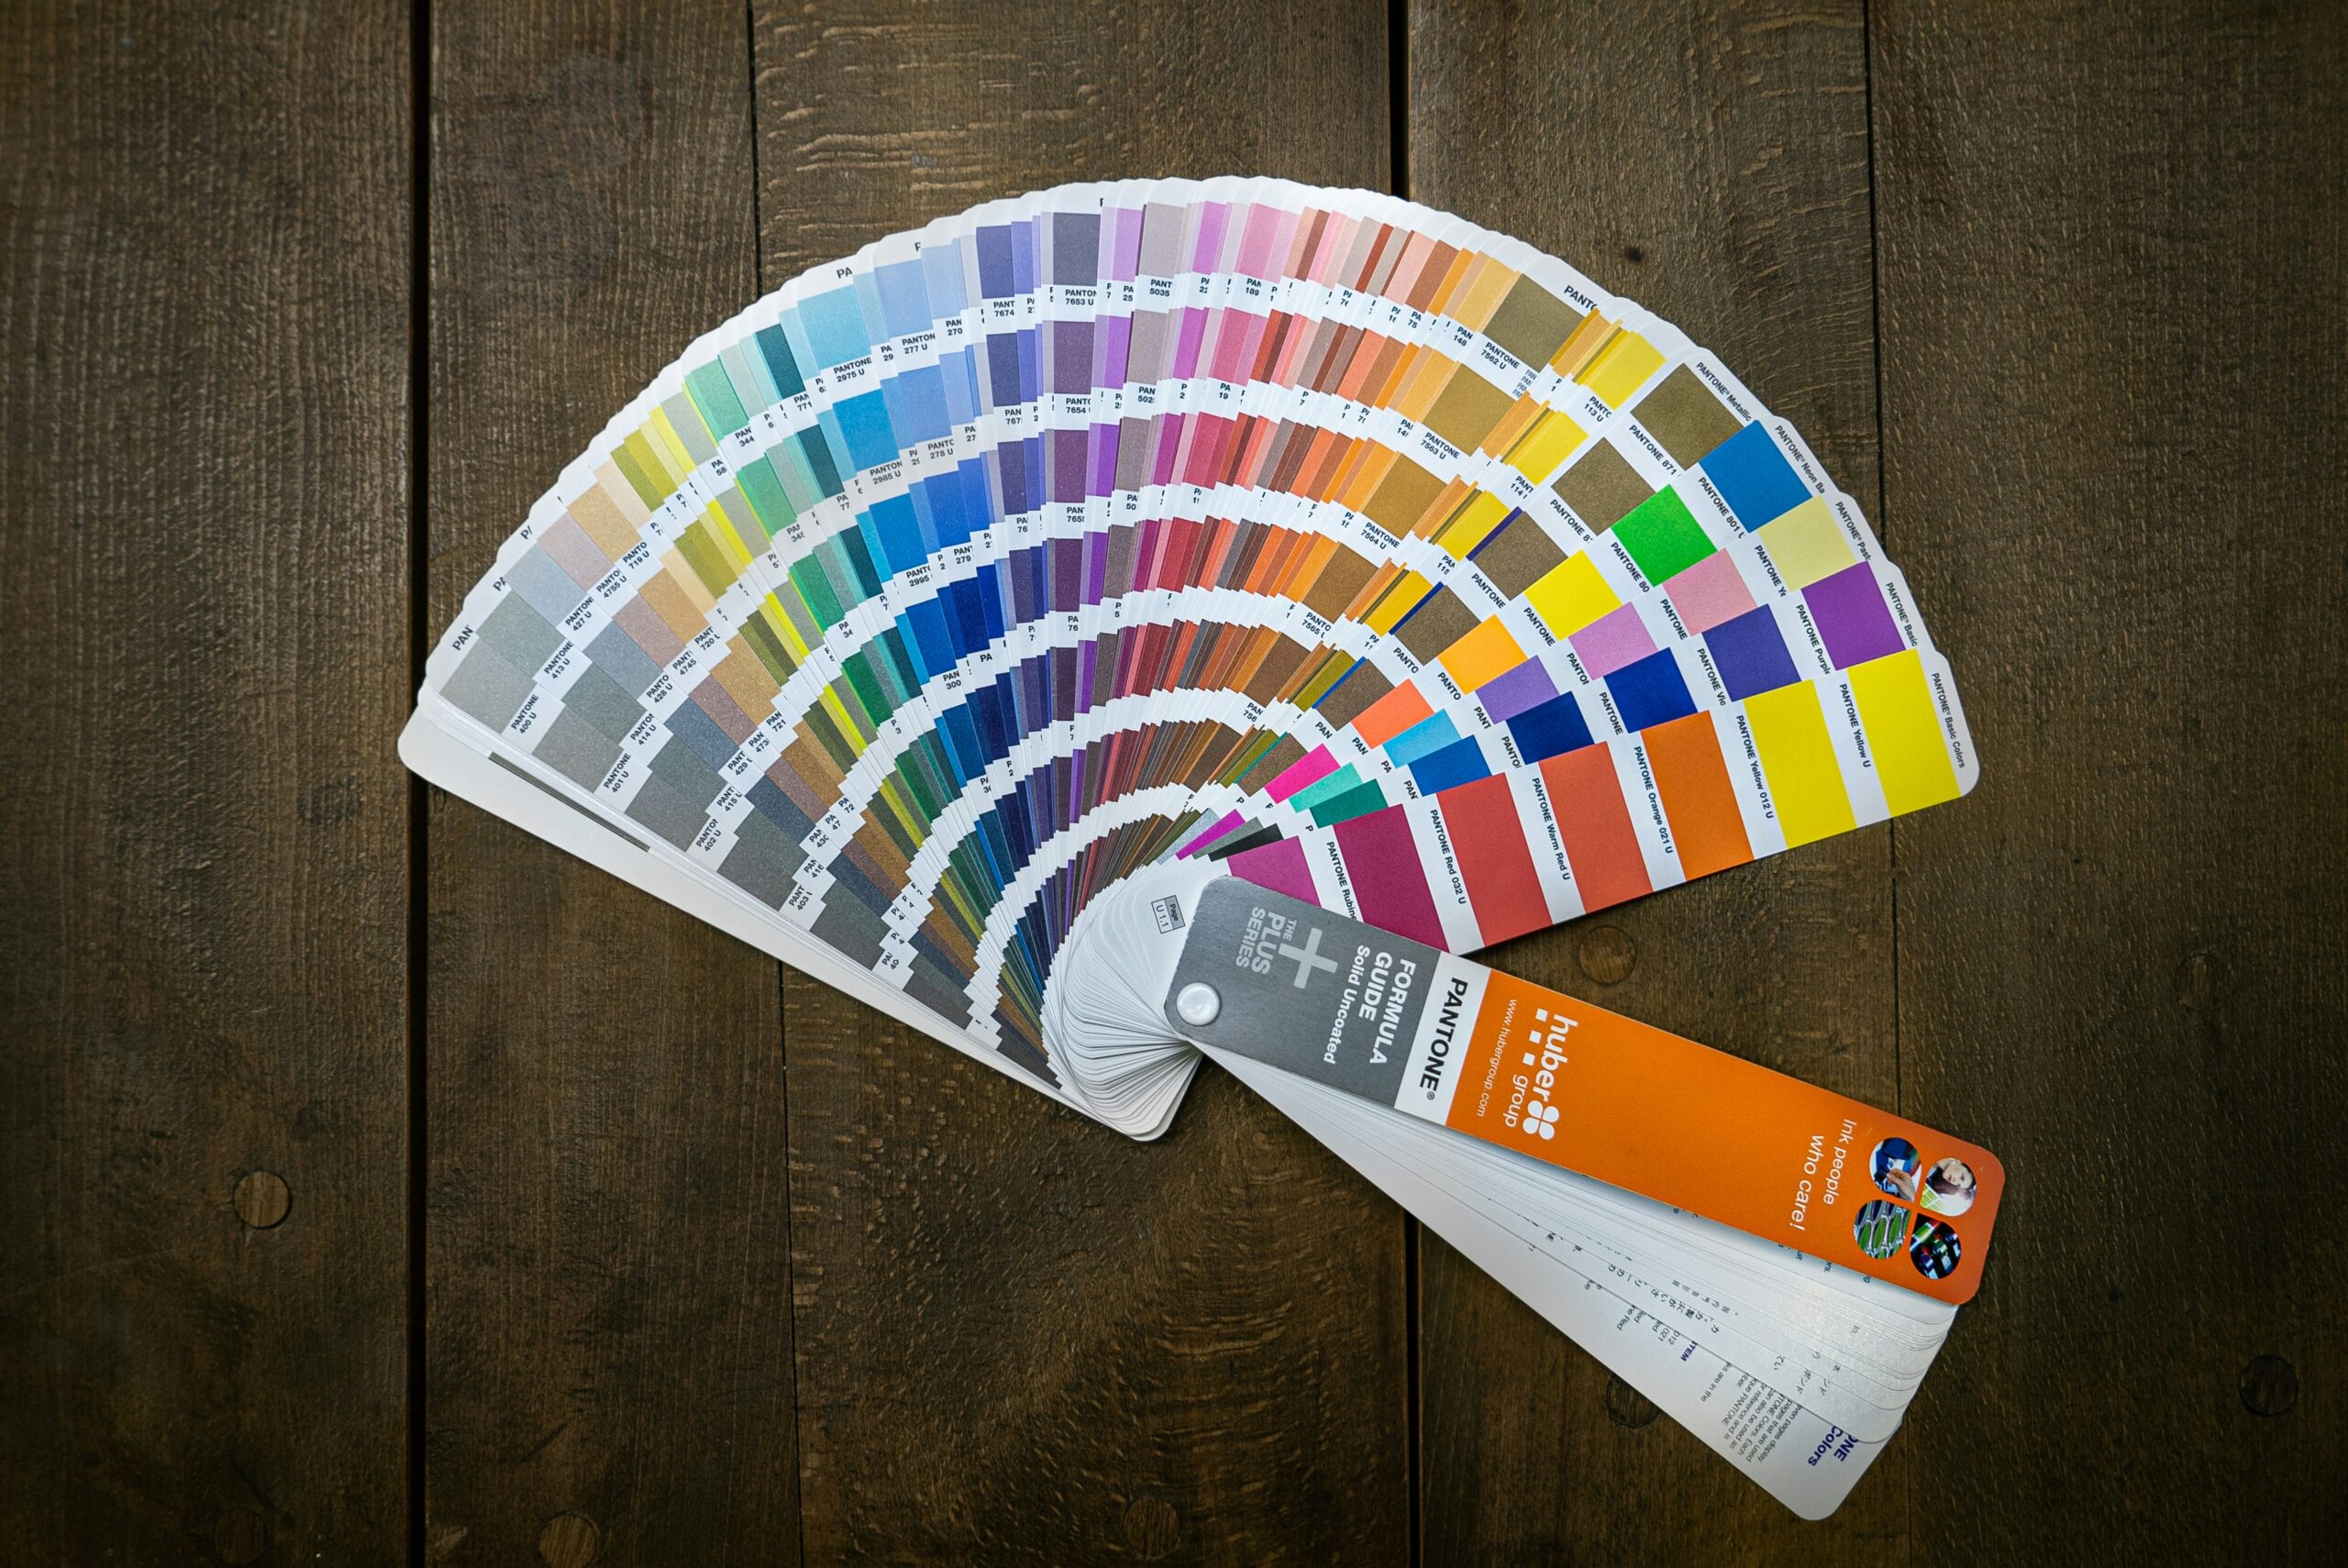 A Pantone color swatch fan is displayed open, revealing a spectrum of colors, arranged on a wooden surface.